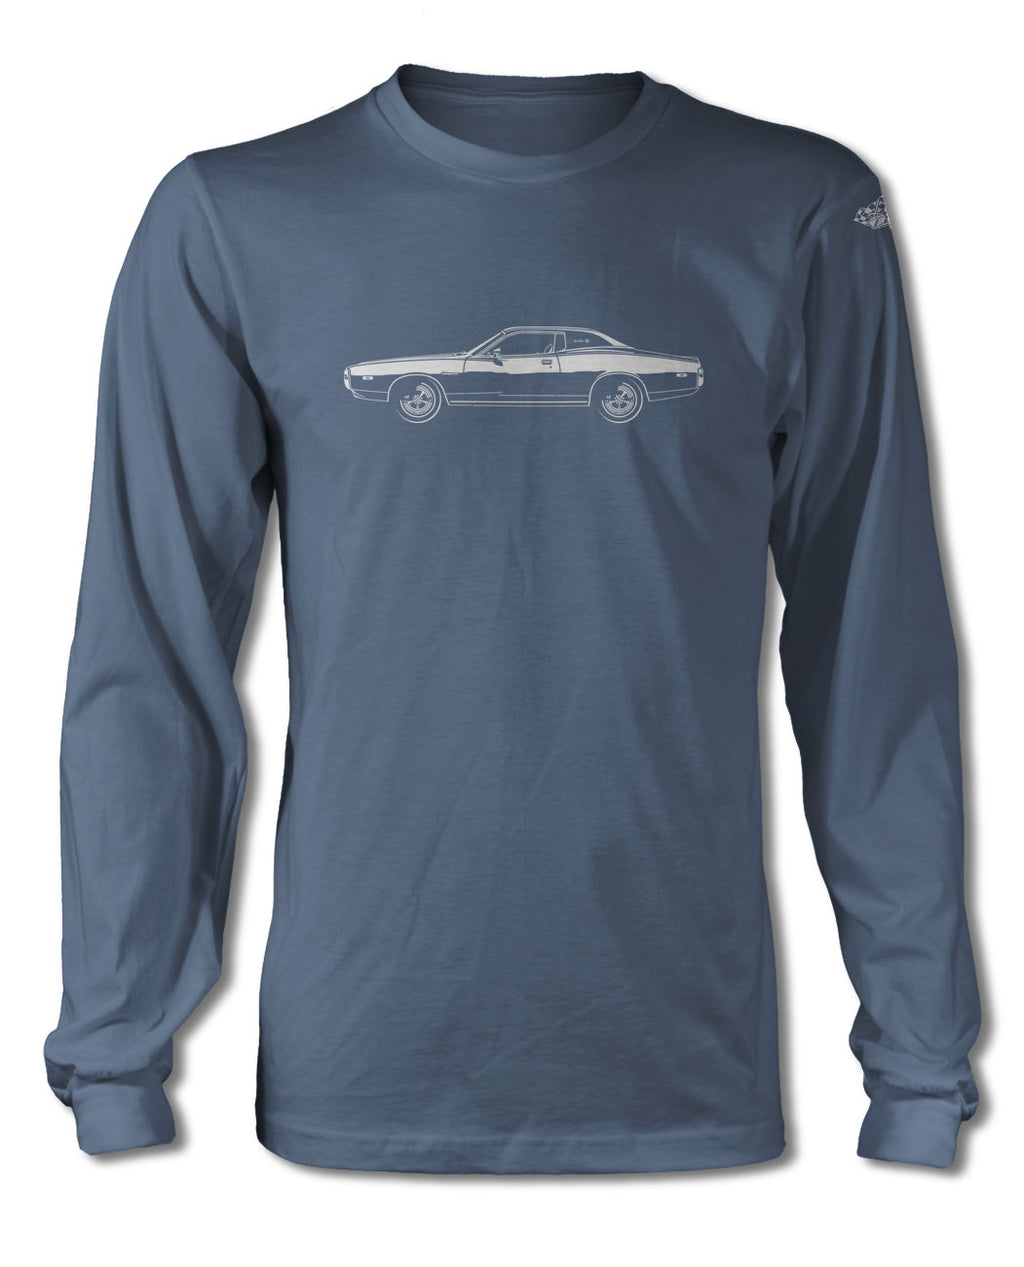 1972 Dodge Charger SE Hardtop T-Shirt - Long Sleeves - Side View